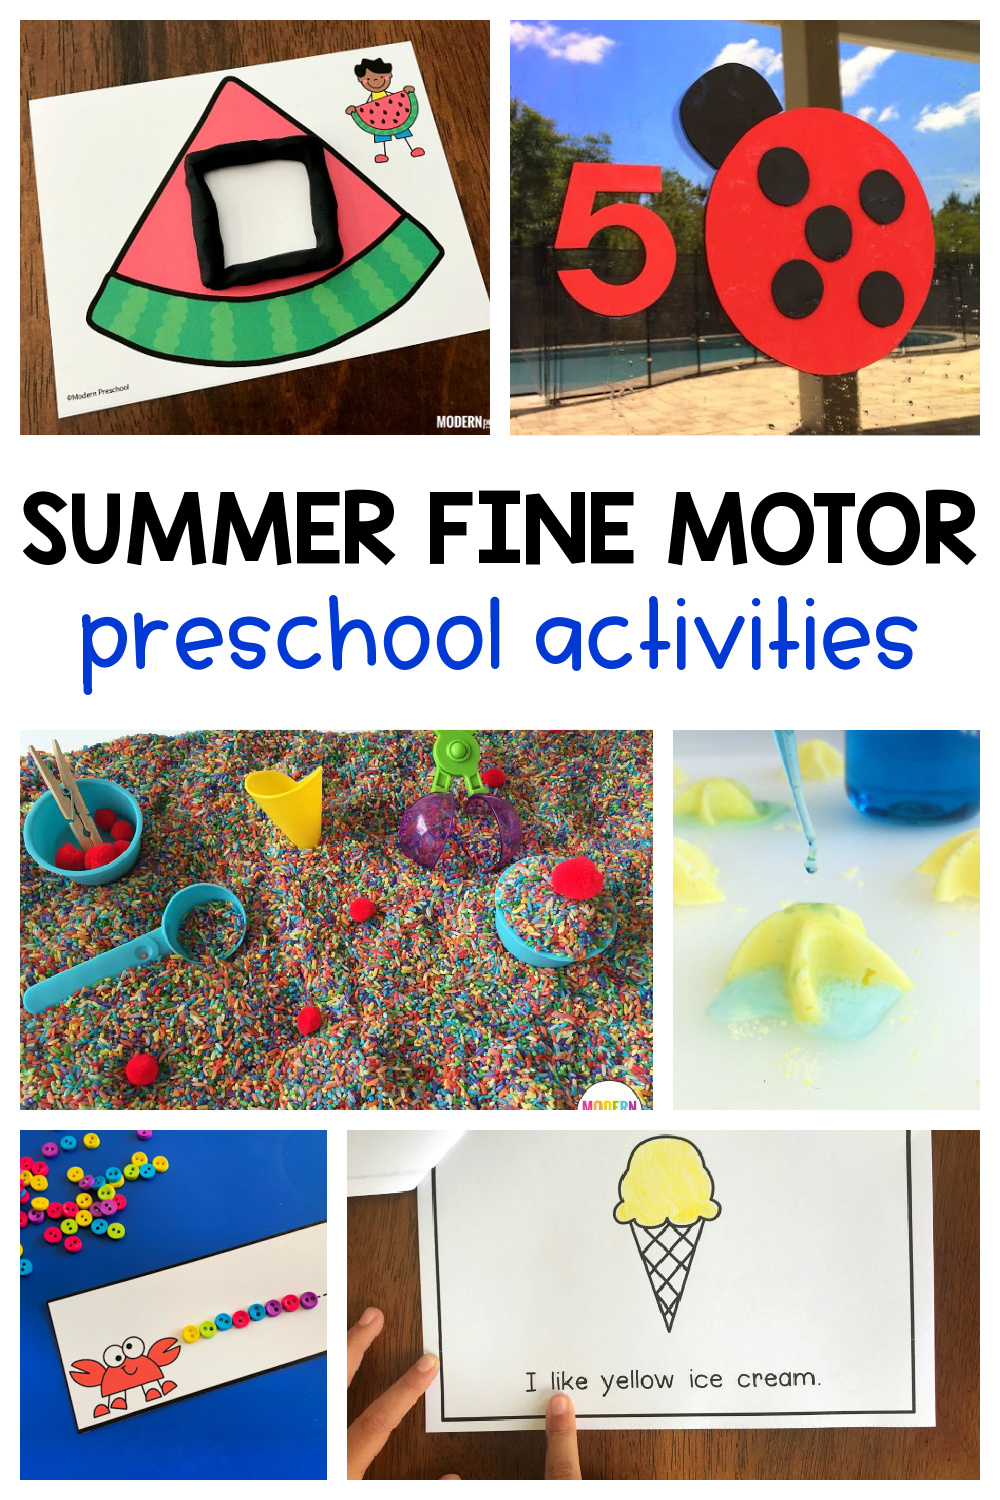 Summer fine motor preschool activities to add to your ice cream, watermelon, beach, camping, and outside themes at school and home!